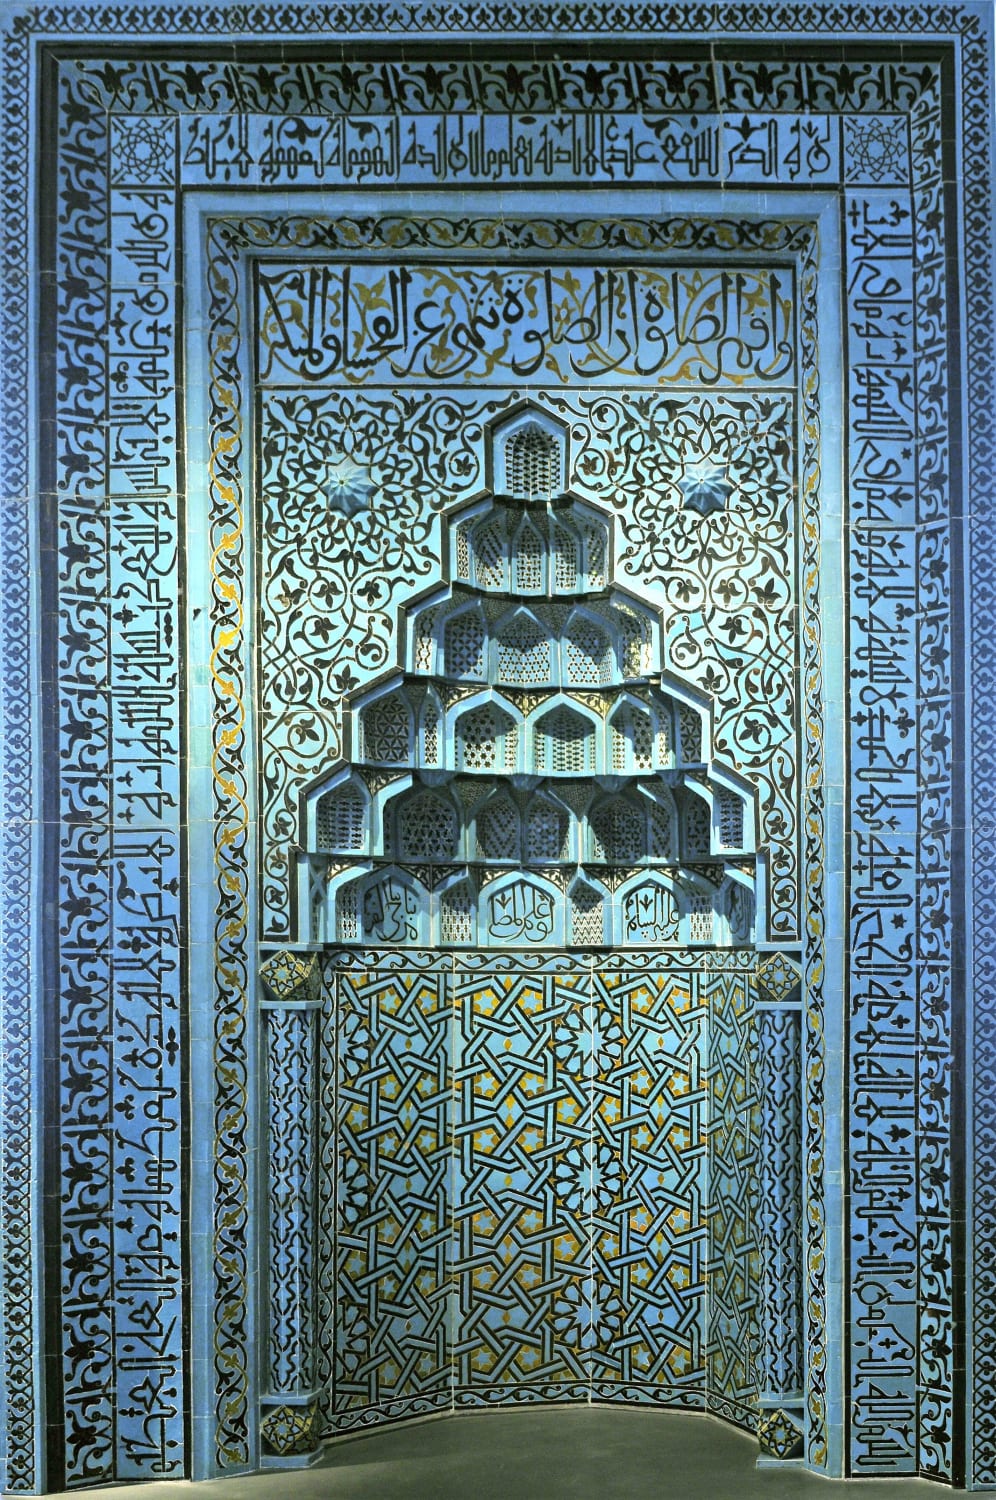 A mihrab (prayer niche) from Bey Hakim Mosque in Turkey. Glazed ceramic, faience mosaic. Rum Seljuk Sultanate, 1270 CE, now housed at the Museum of Islamic Art at the Pergamon Museum